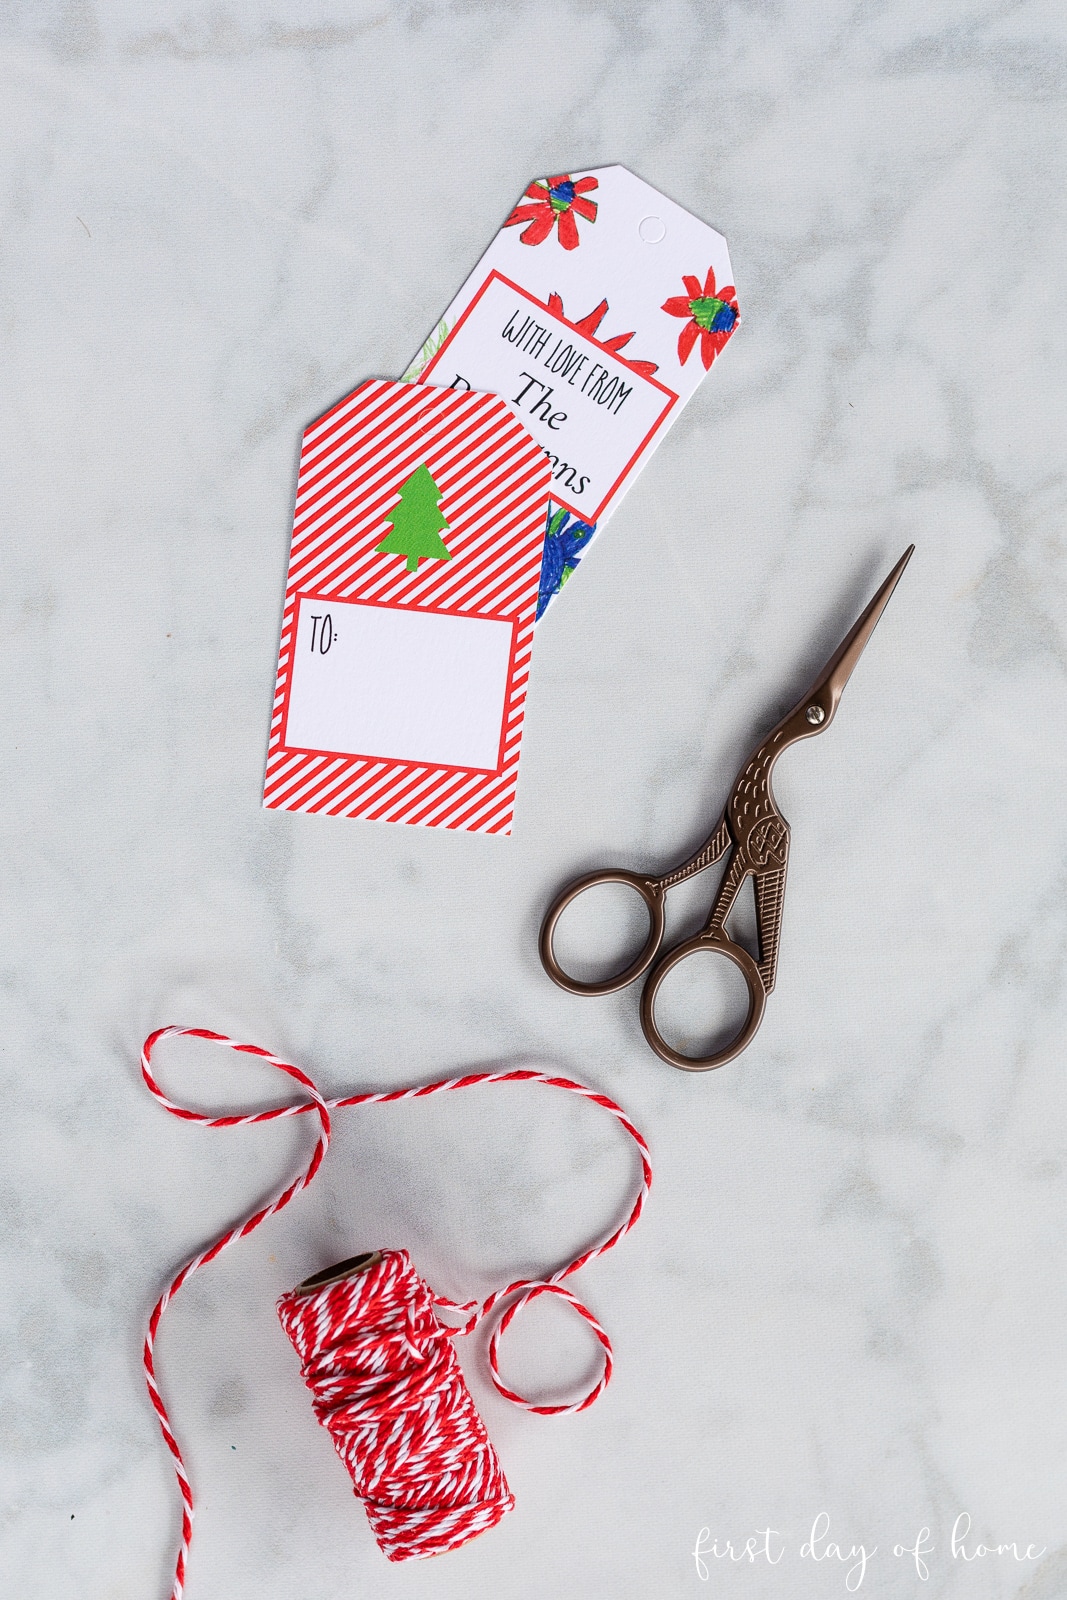 Personalized gift tags with red baker's twine and scissors